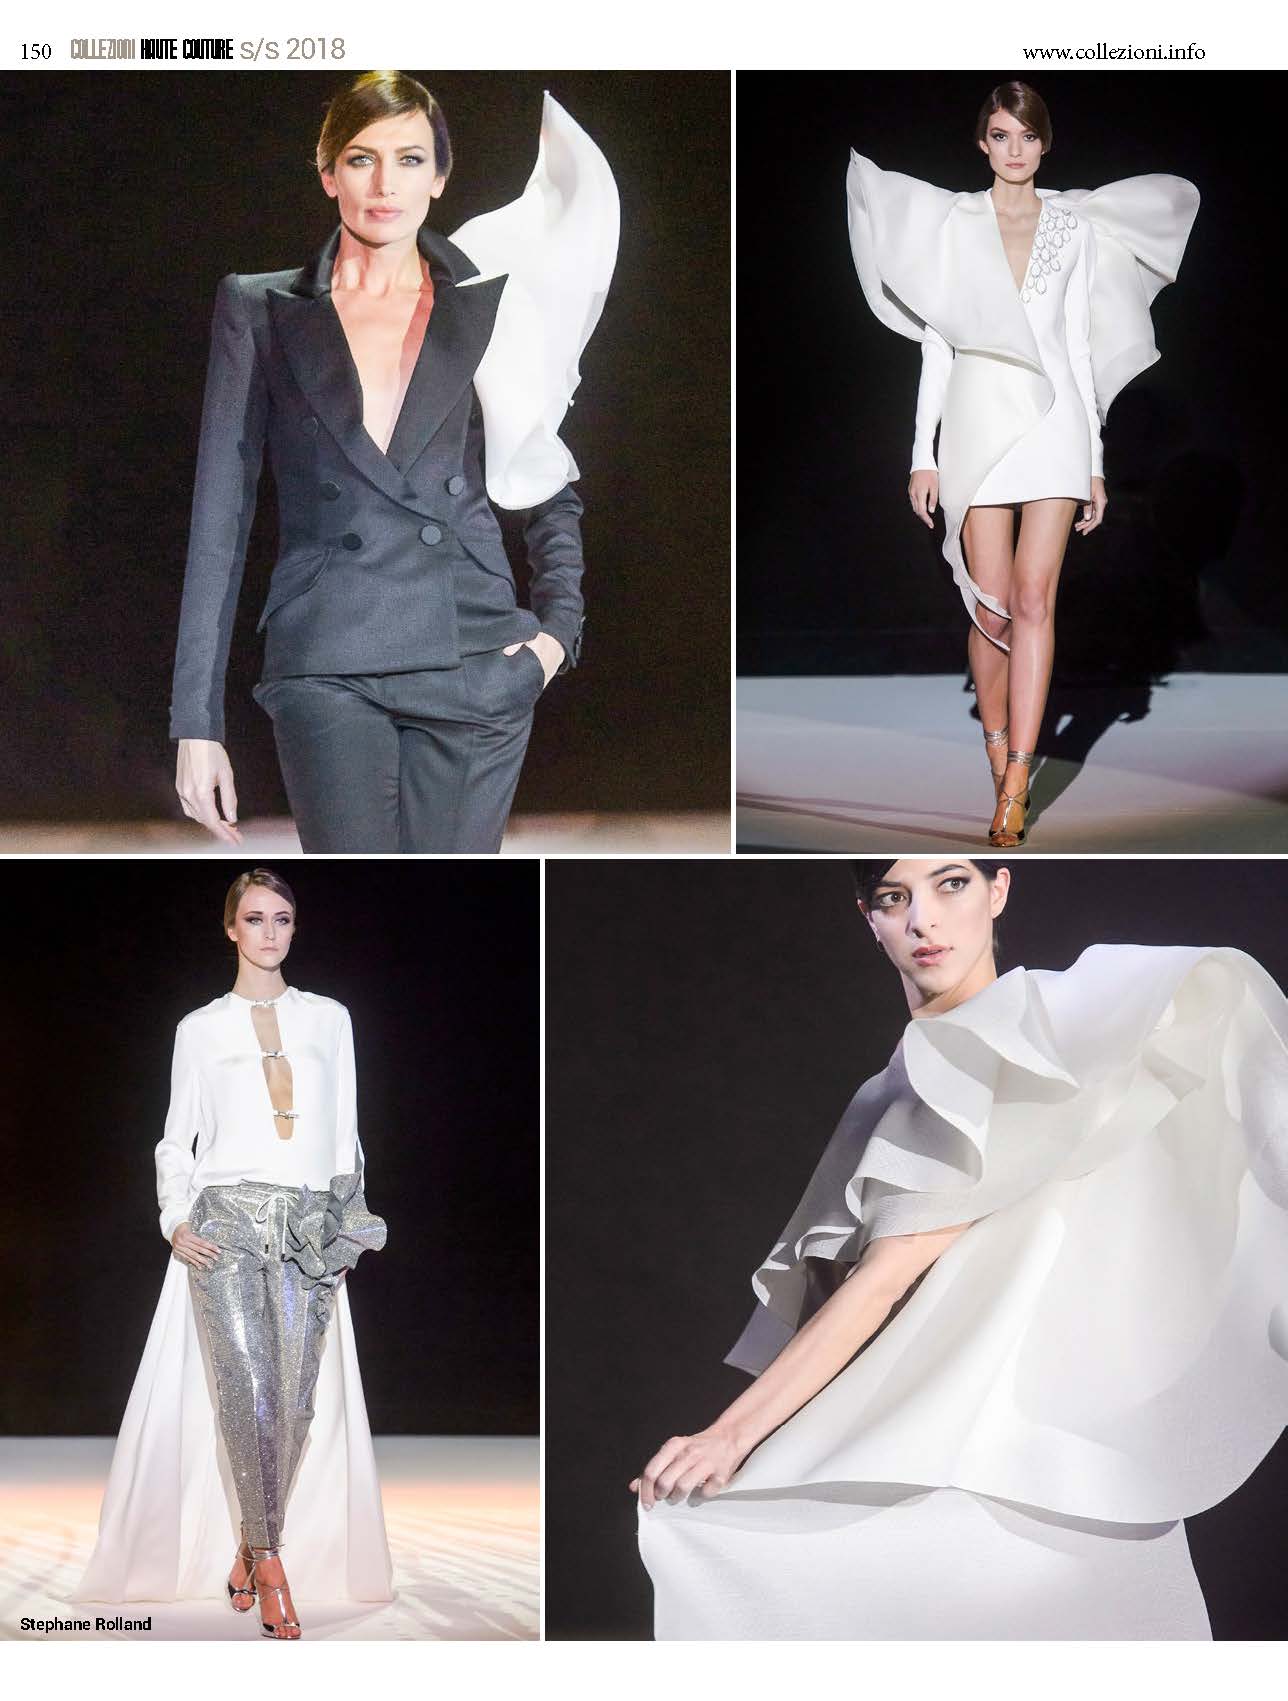 stephane rolland_Page_1